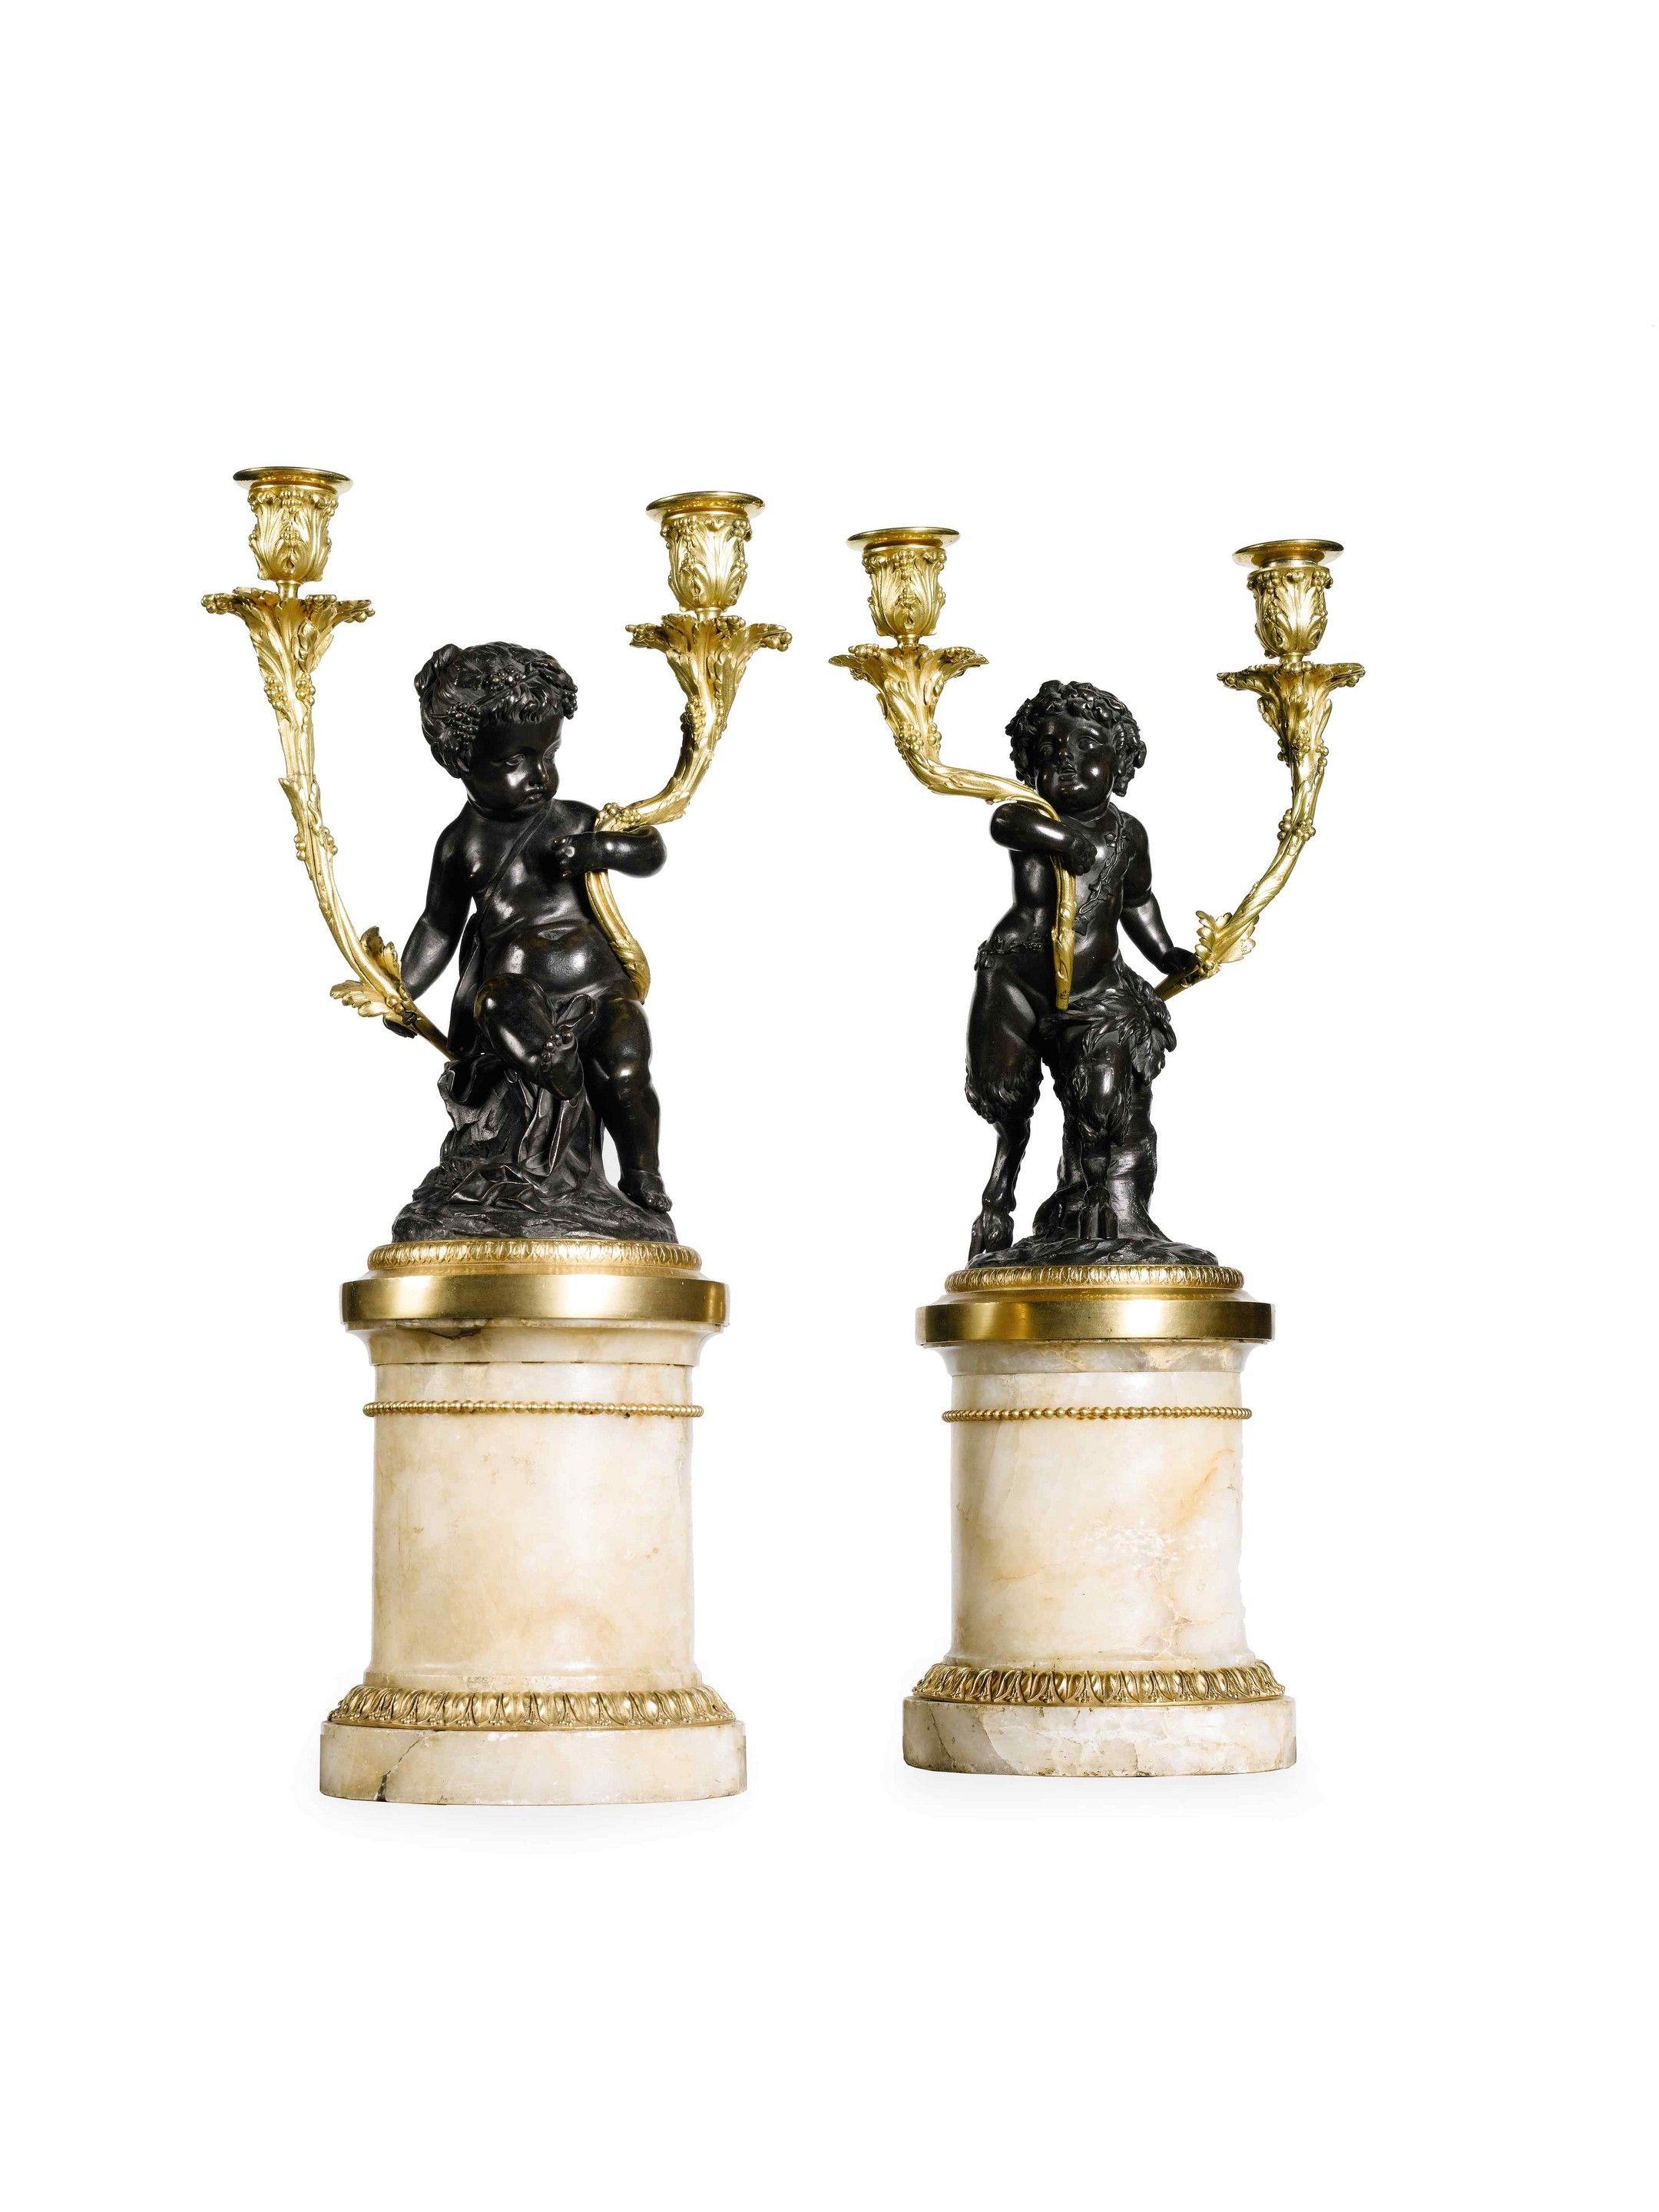 English Pair of 19th Century Bronze, Ormolu and Fluorspar Candelabra For Sale